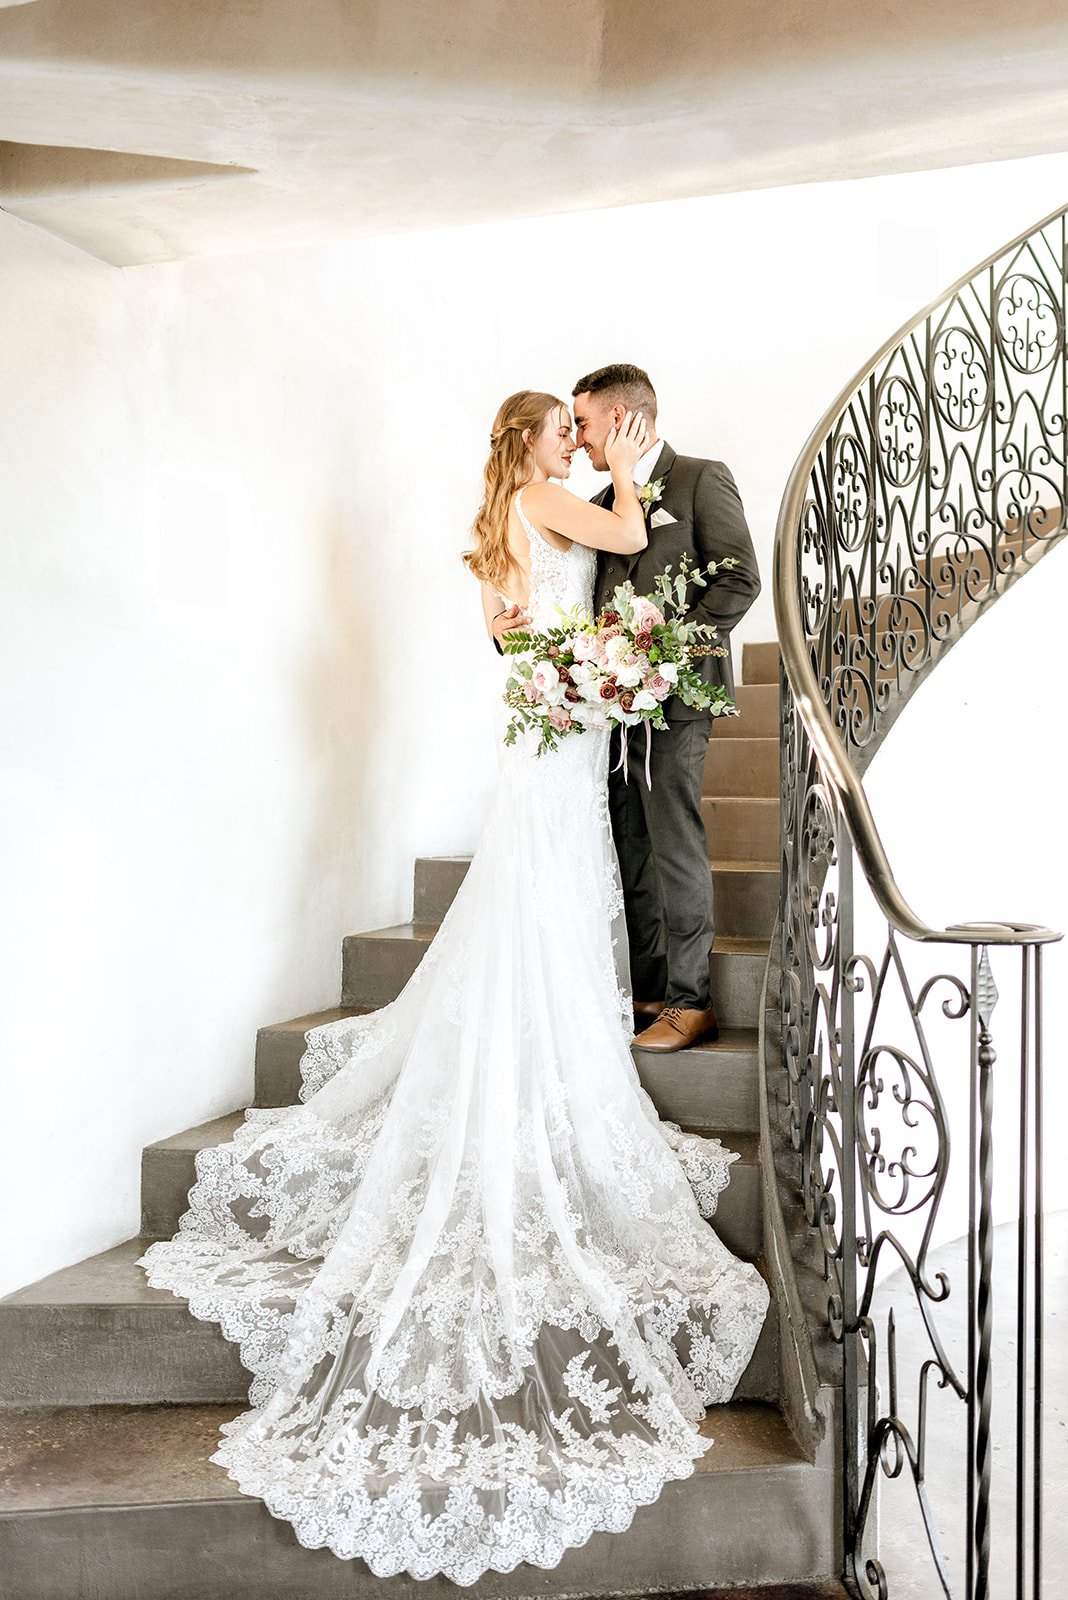 Bride and groom portraits on a iron staircase at the Malibu Solstice Vineyard venue.